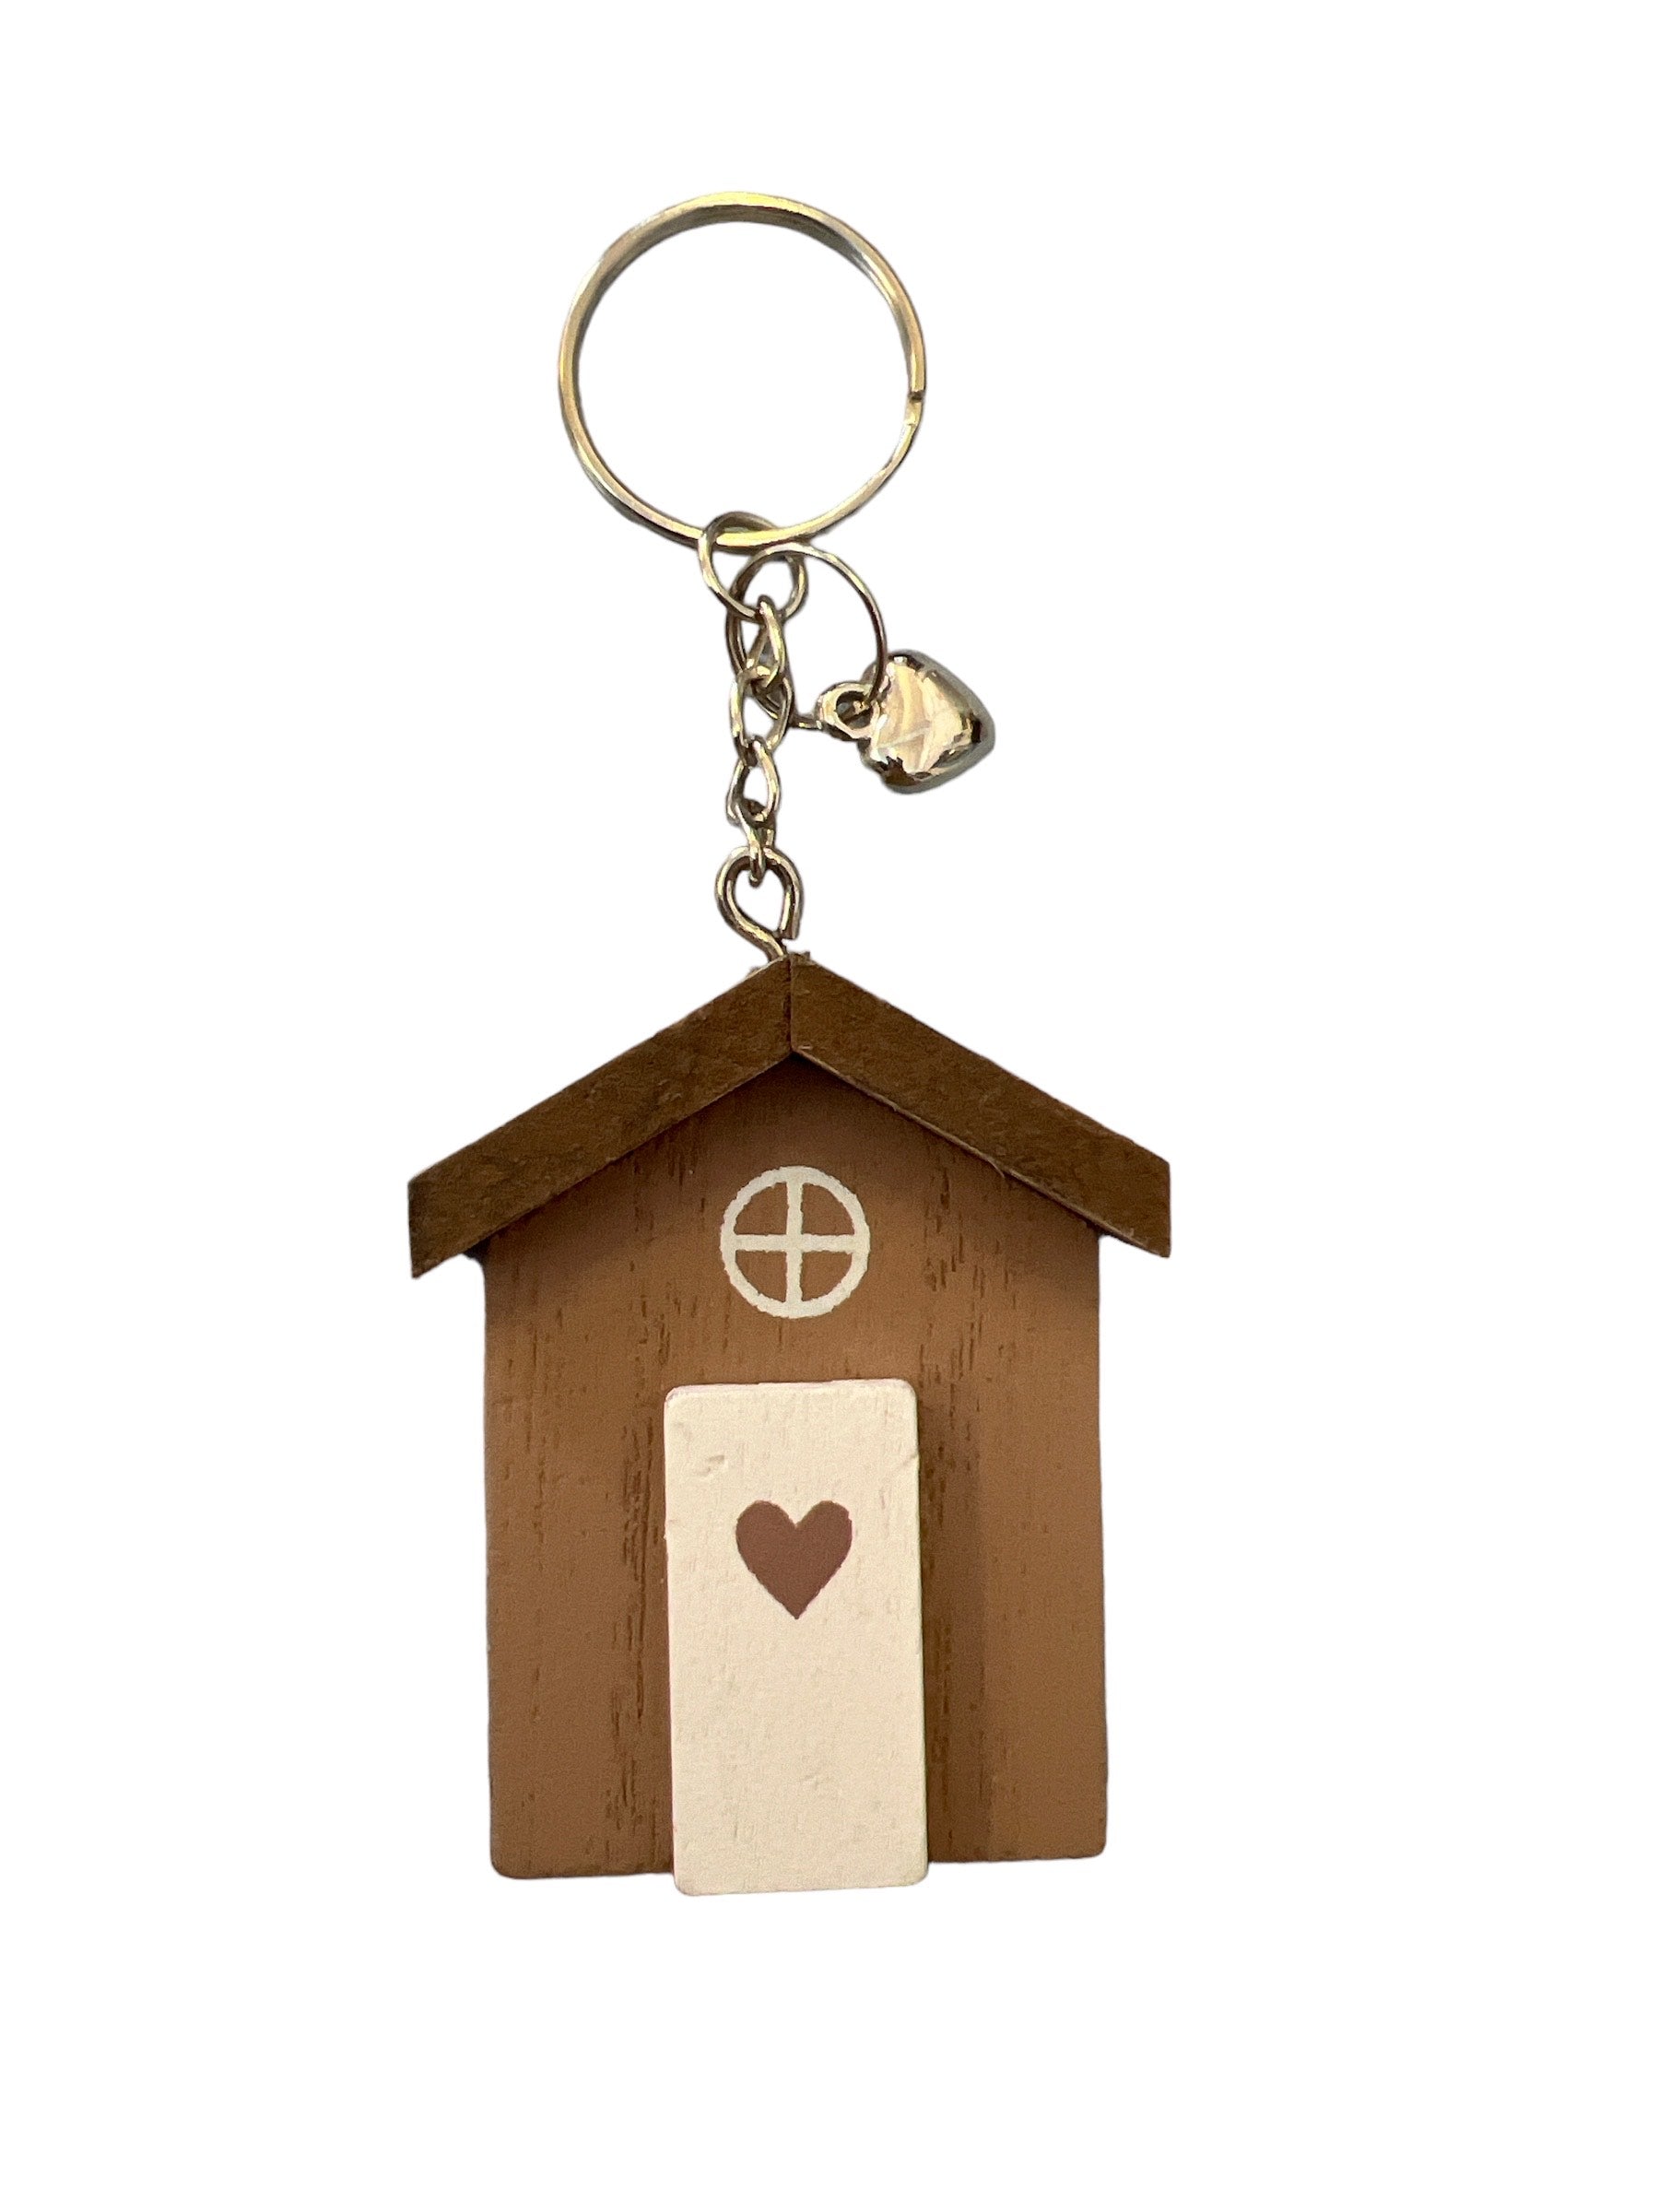 Wooden Beach Hut / Shed Keyring - Sold Singly - Assorted designs